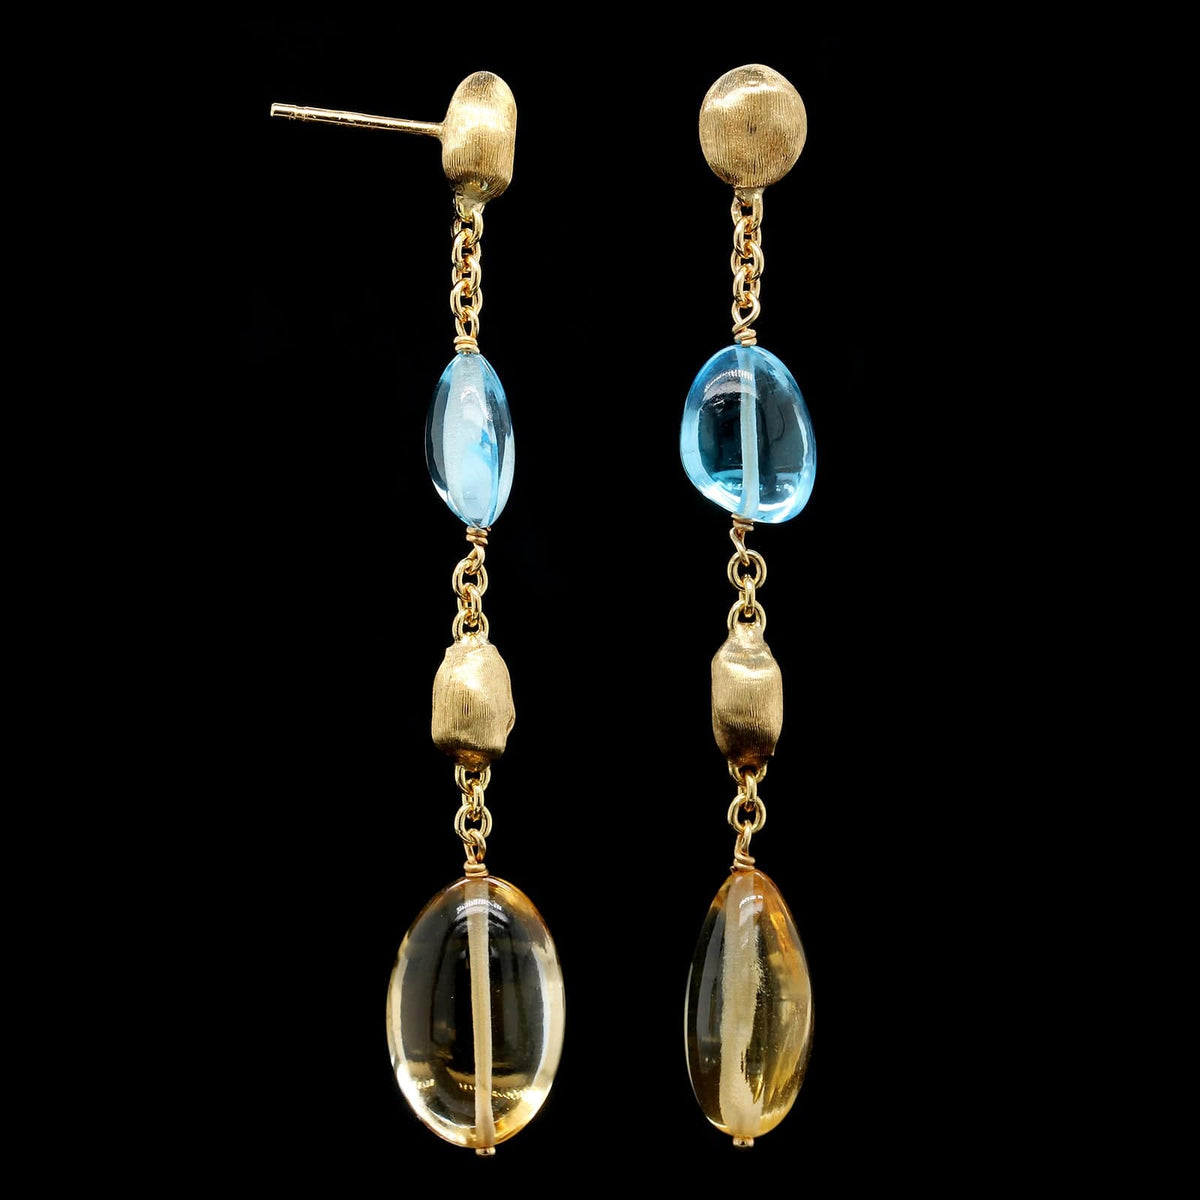 Marco Bicego 18K Yellow Gold Estate Blue Topaz and Citrine Drop Earrings